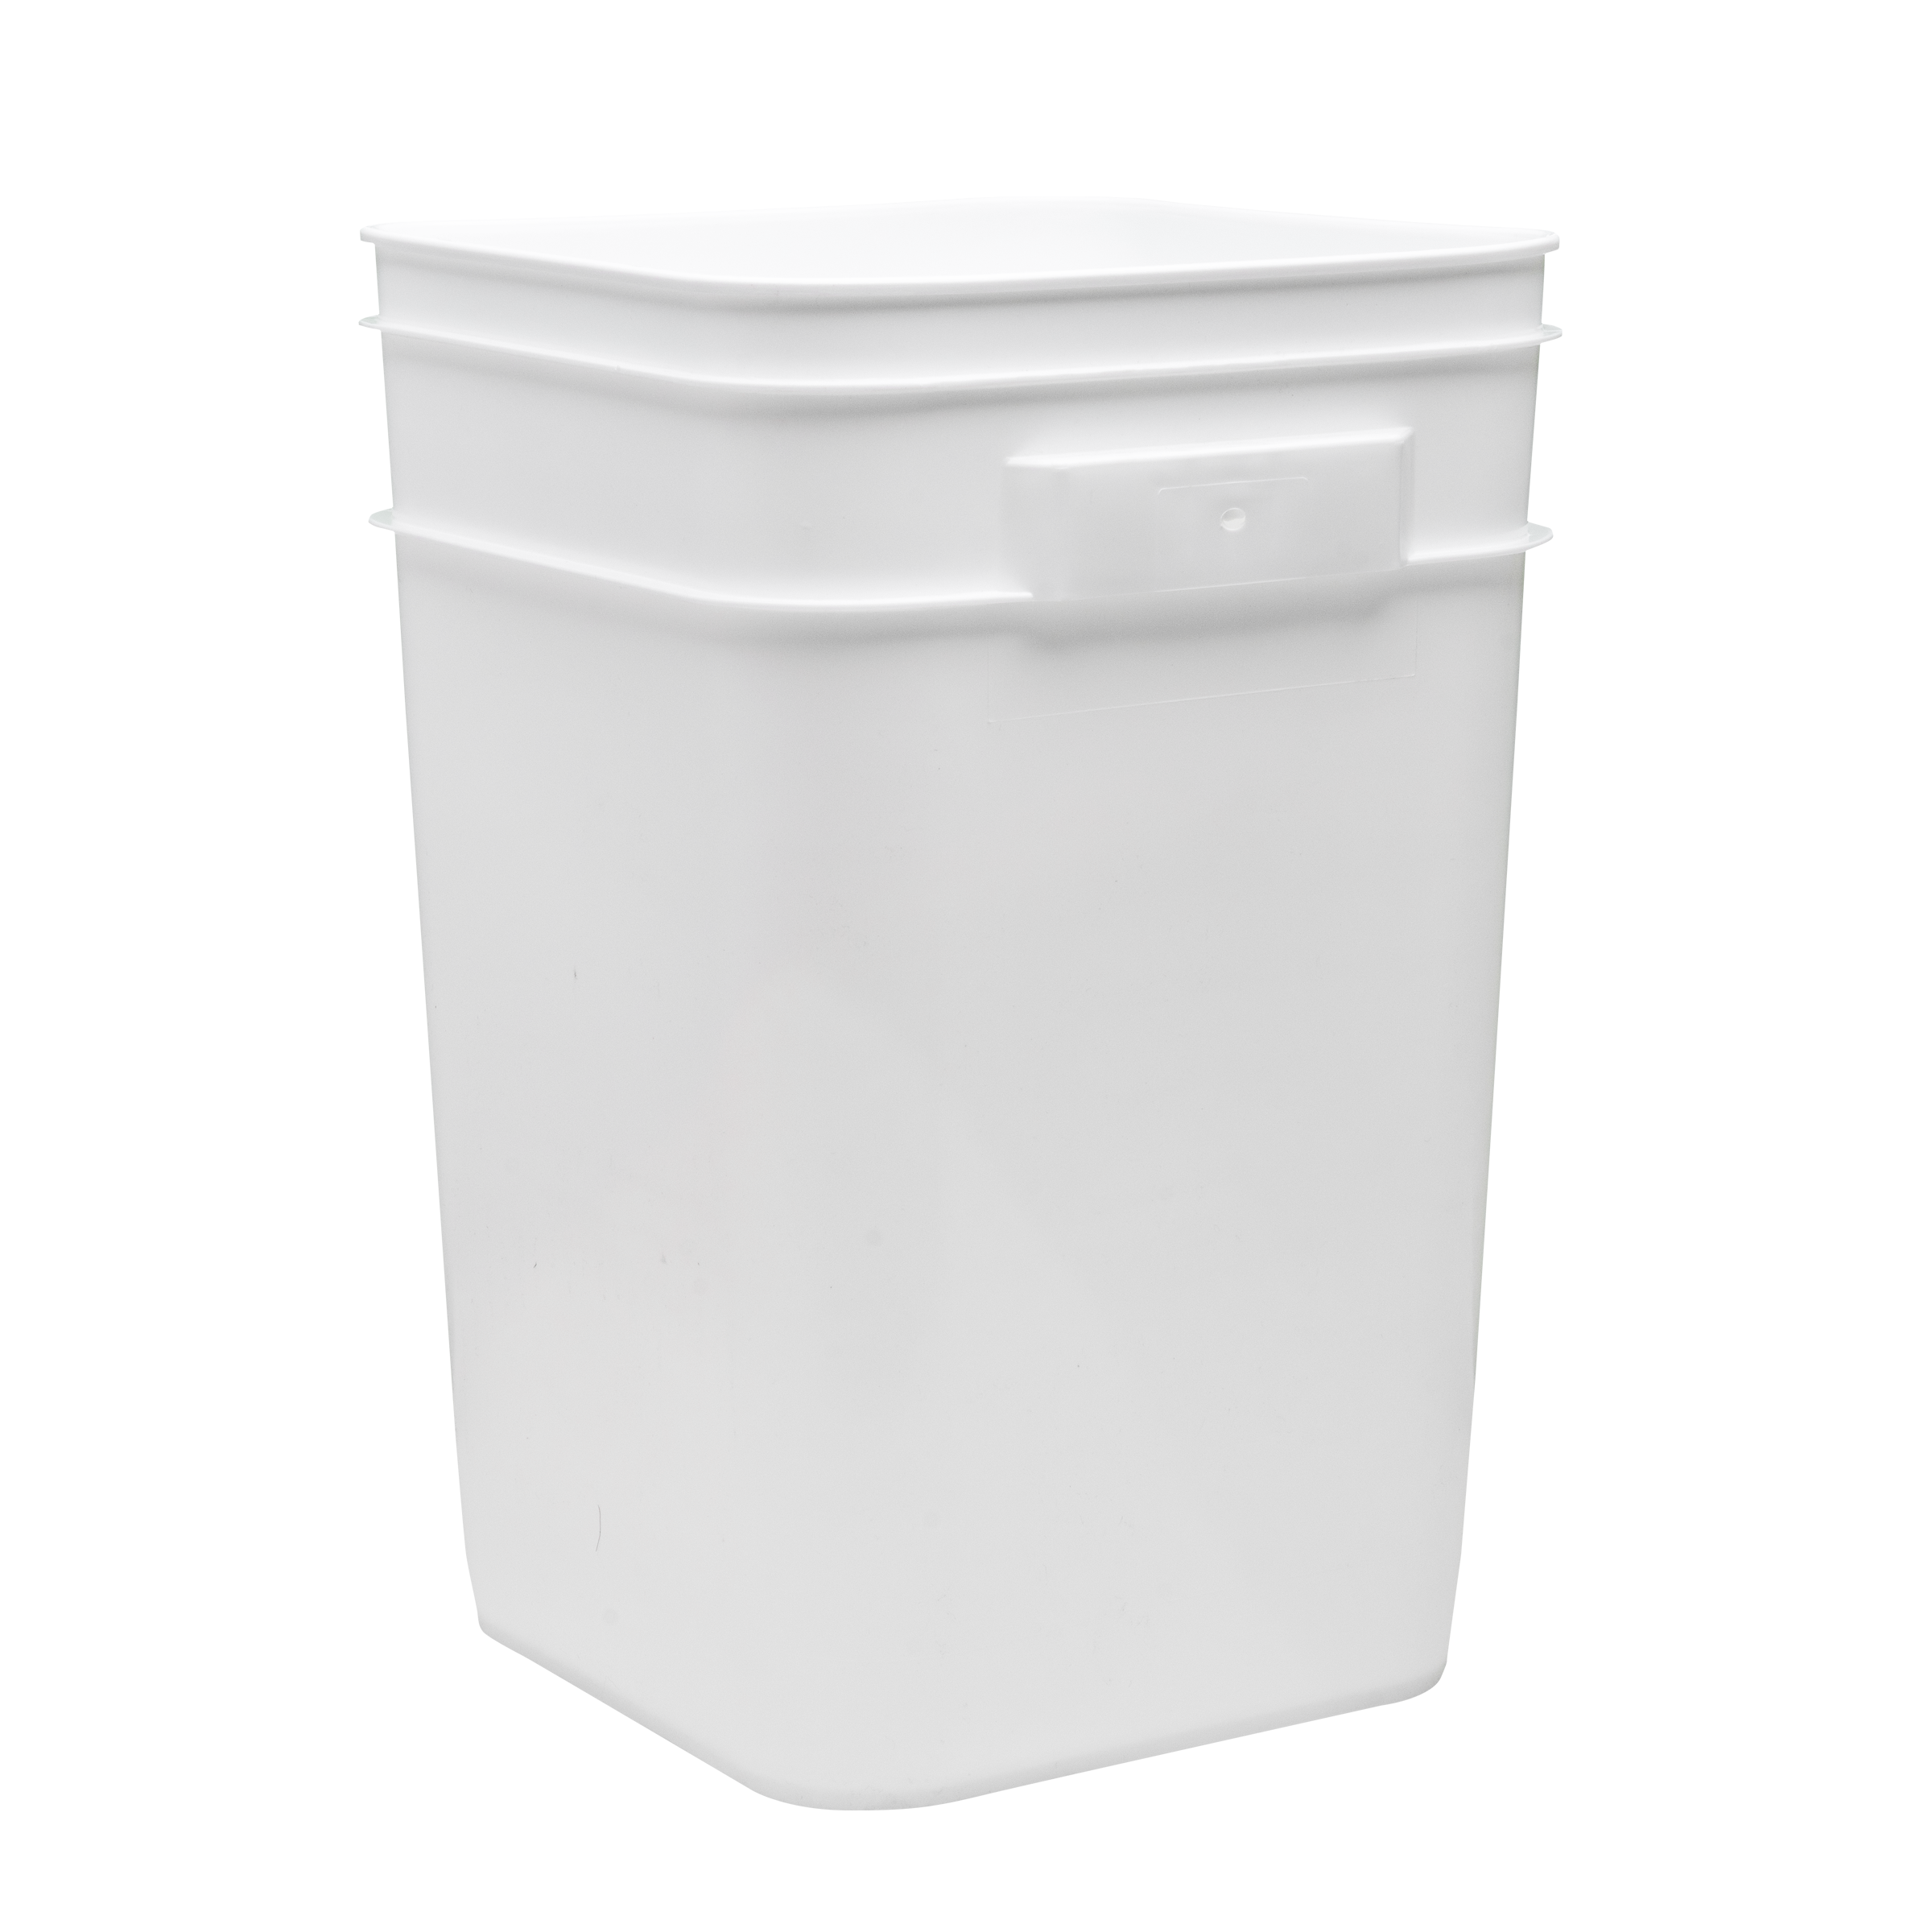 https://www.containersupplycompany.com/wp-content/uploads/2020/03/4-1_4-Gallon-Square-Pail.png